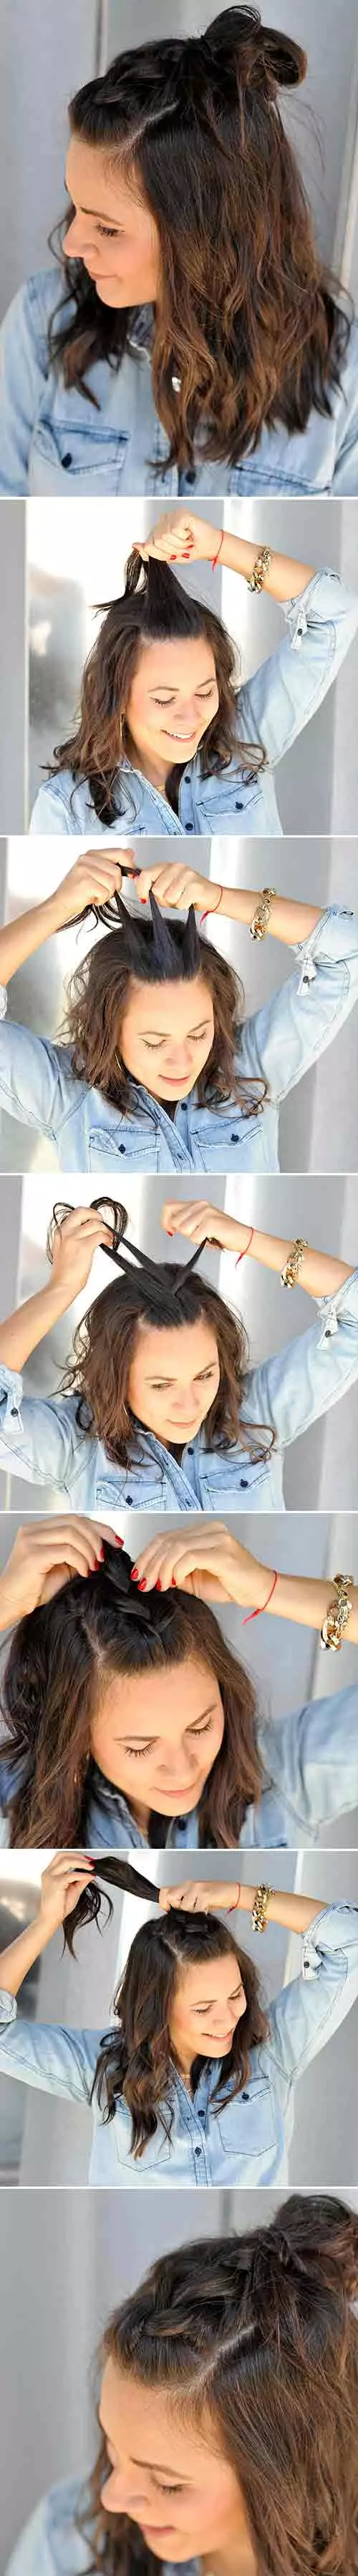 French braid with a top knot diy short hairstyle